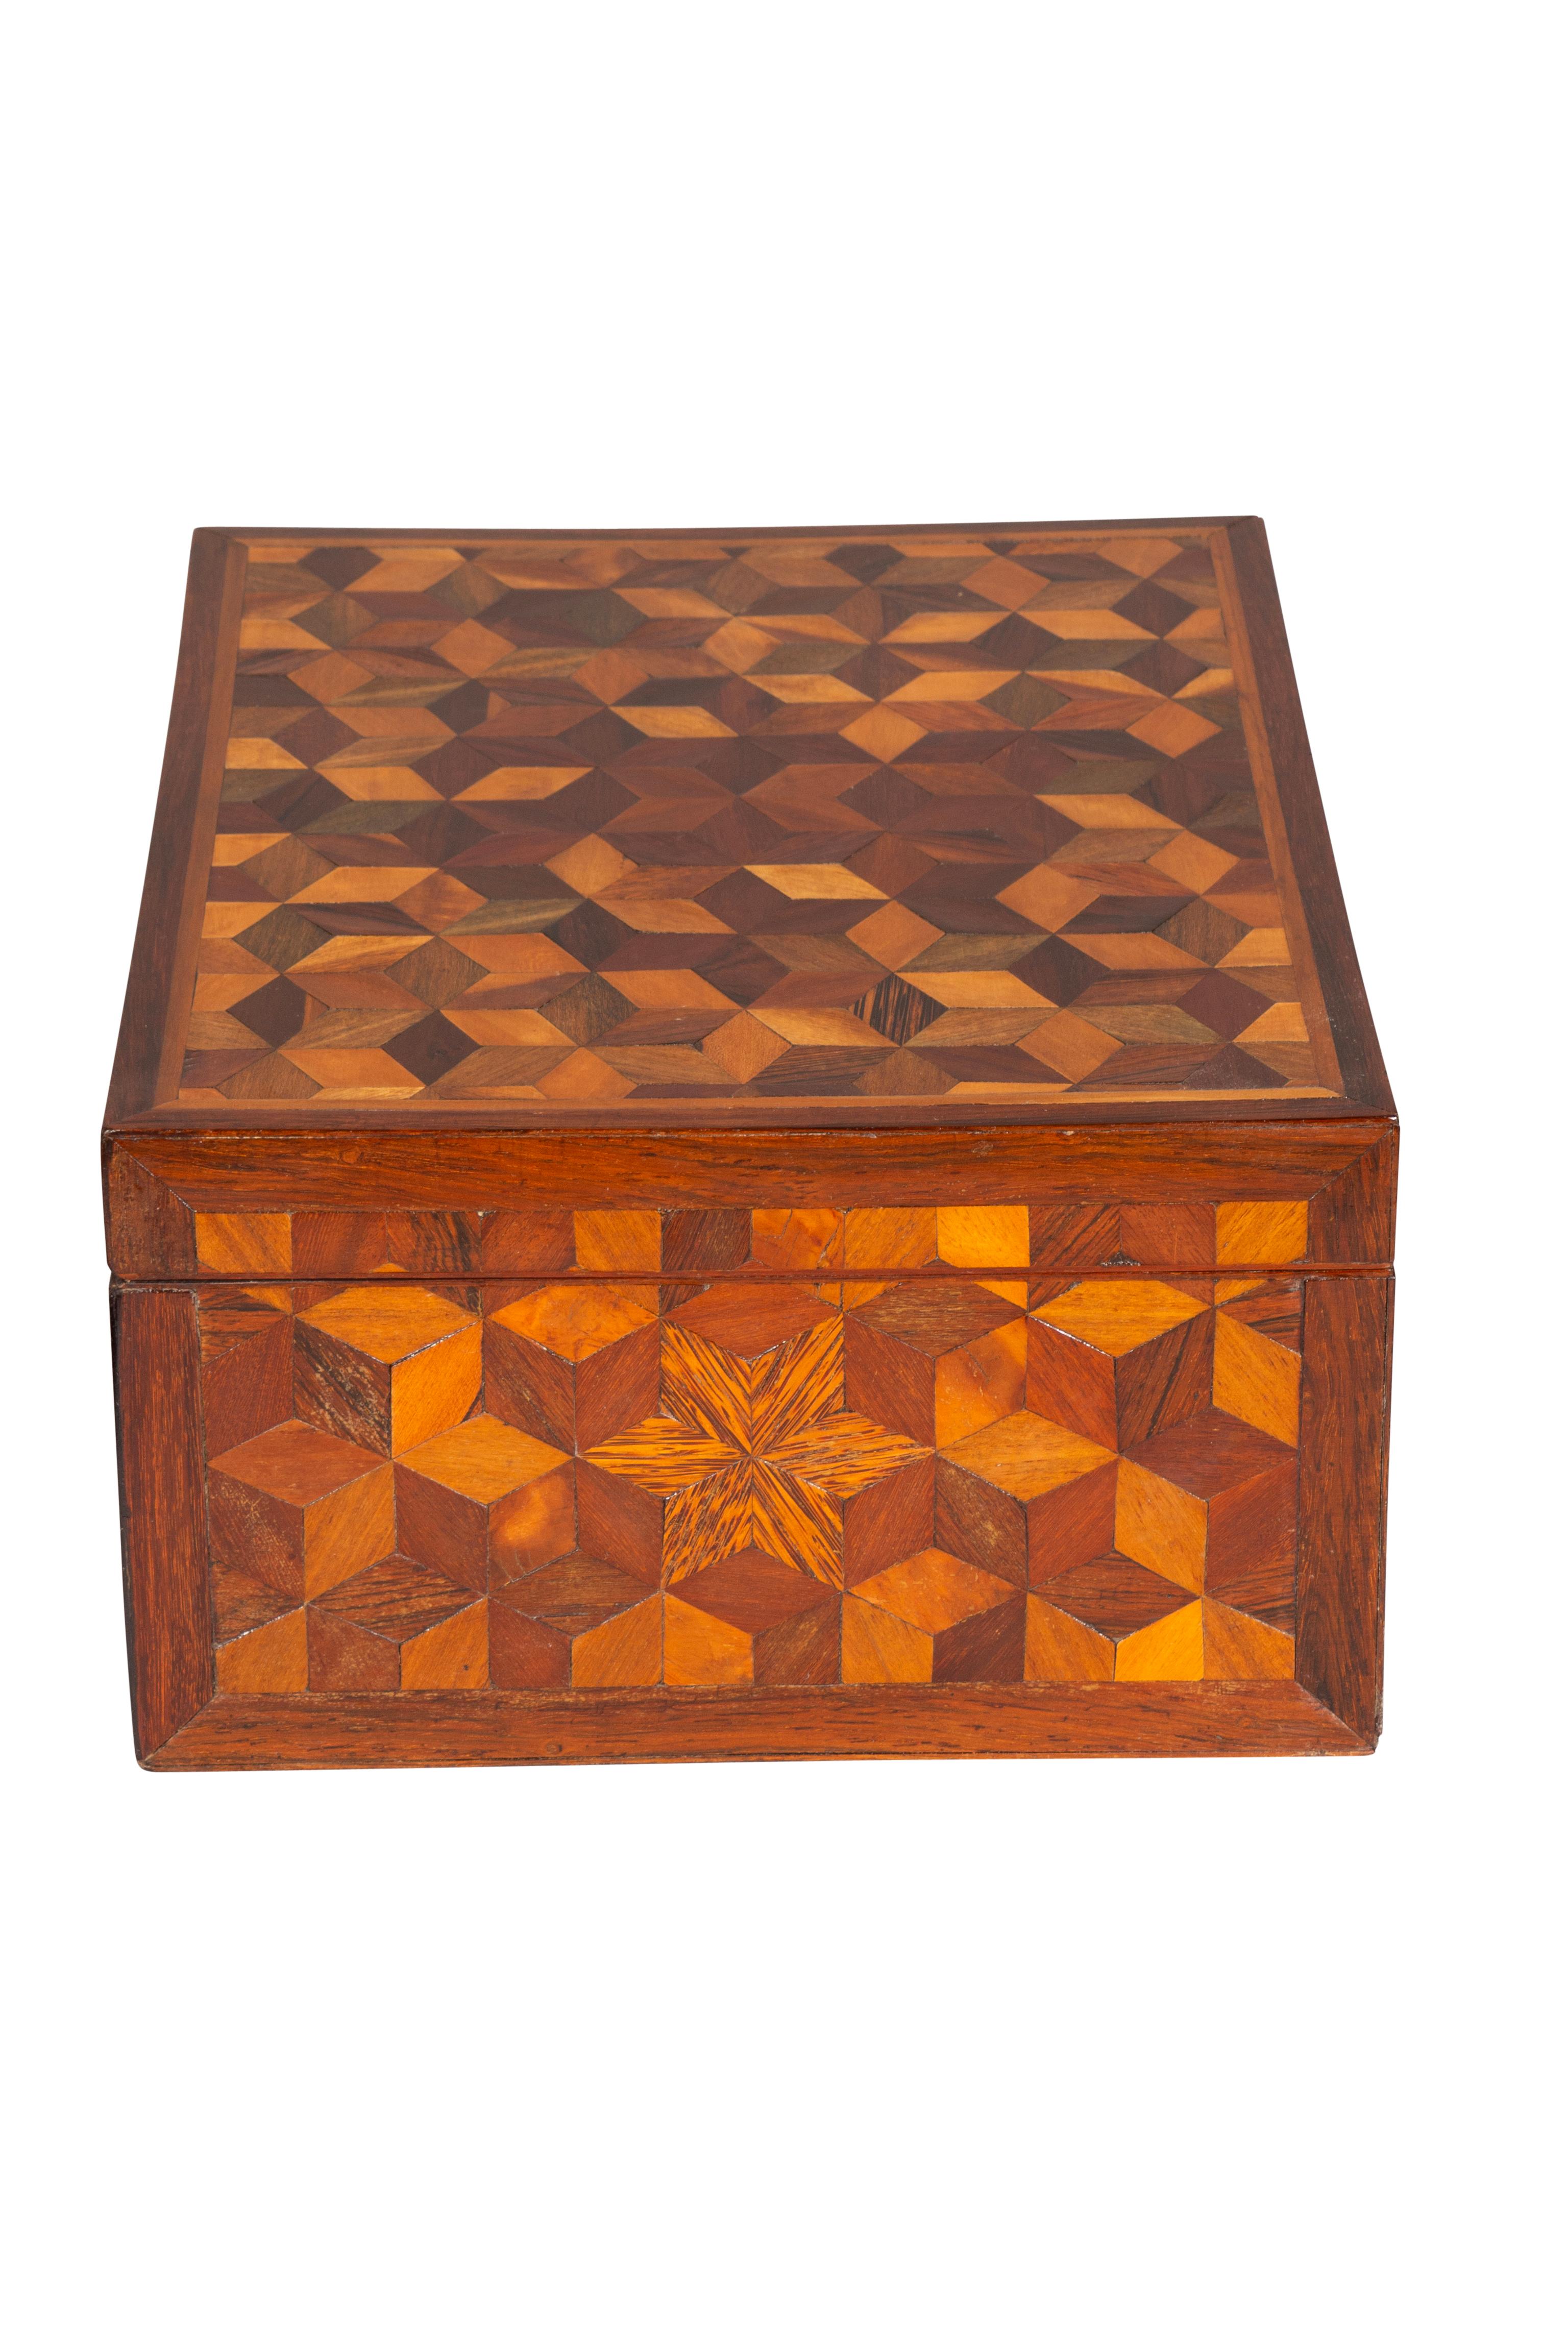 English Regency Parquetry Box For Sale